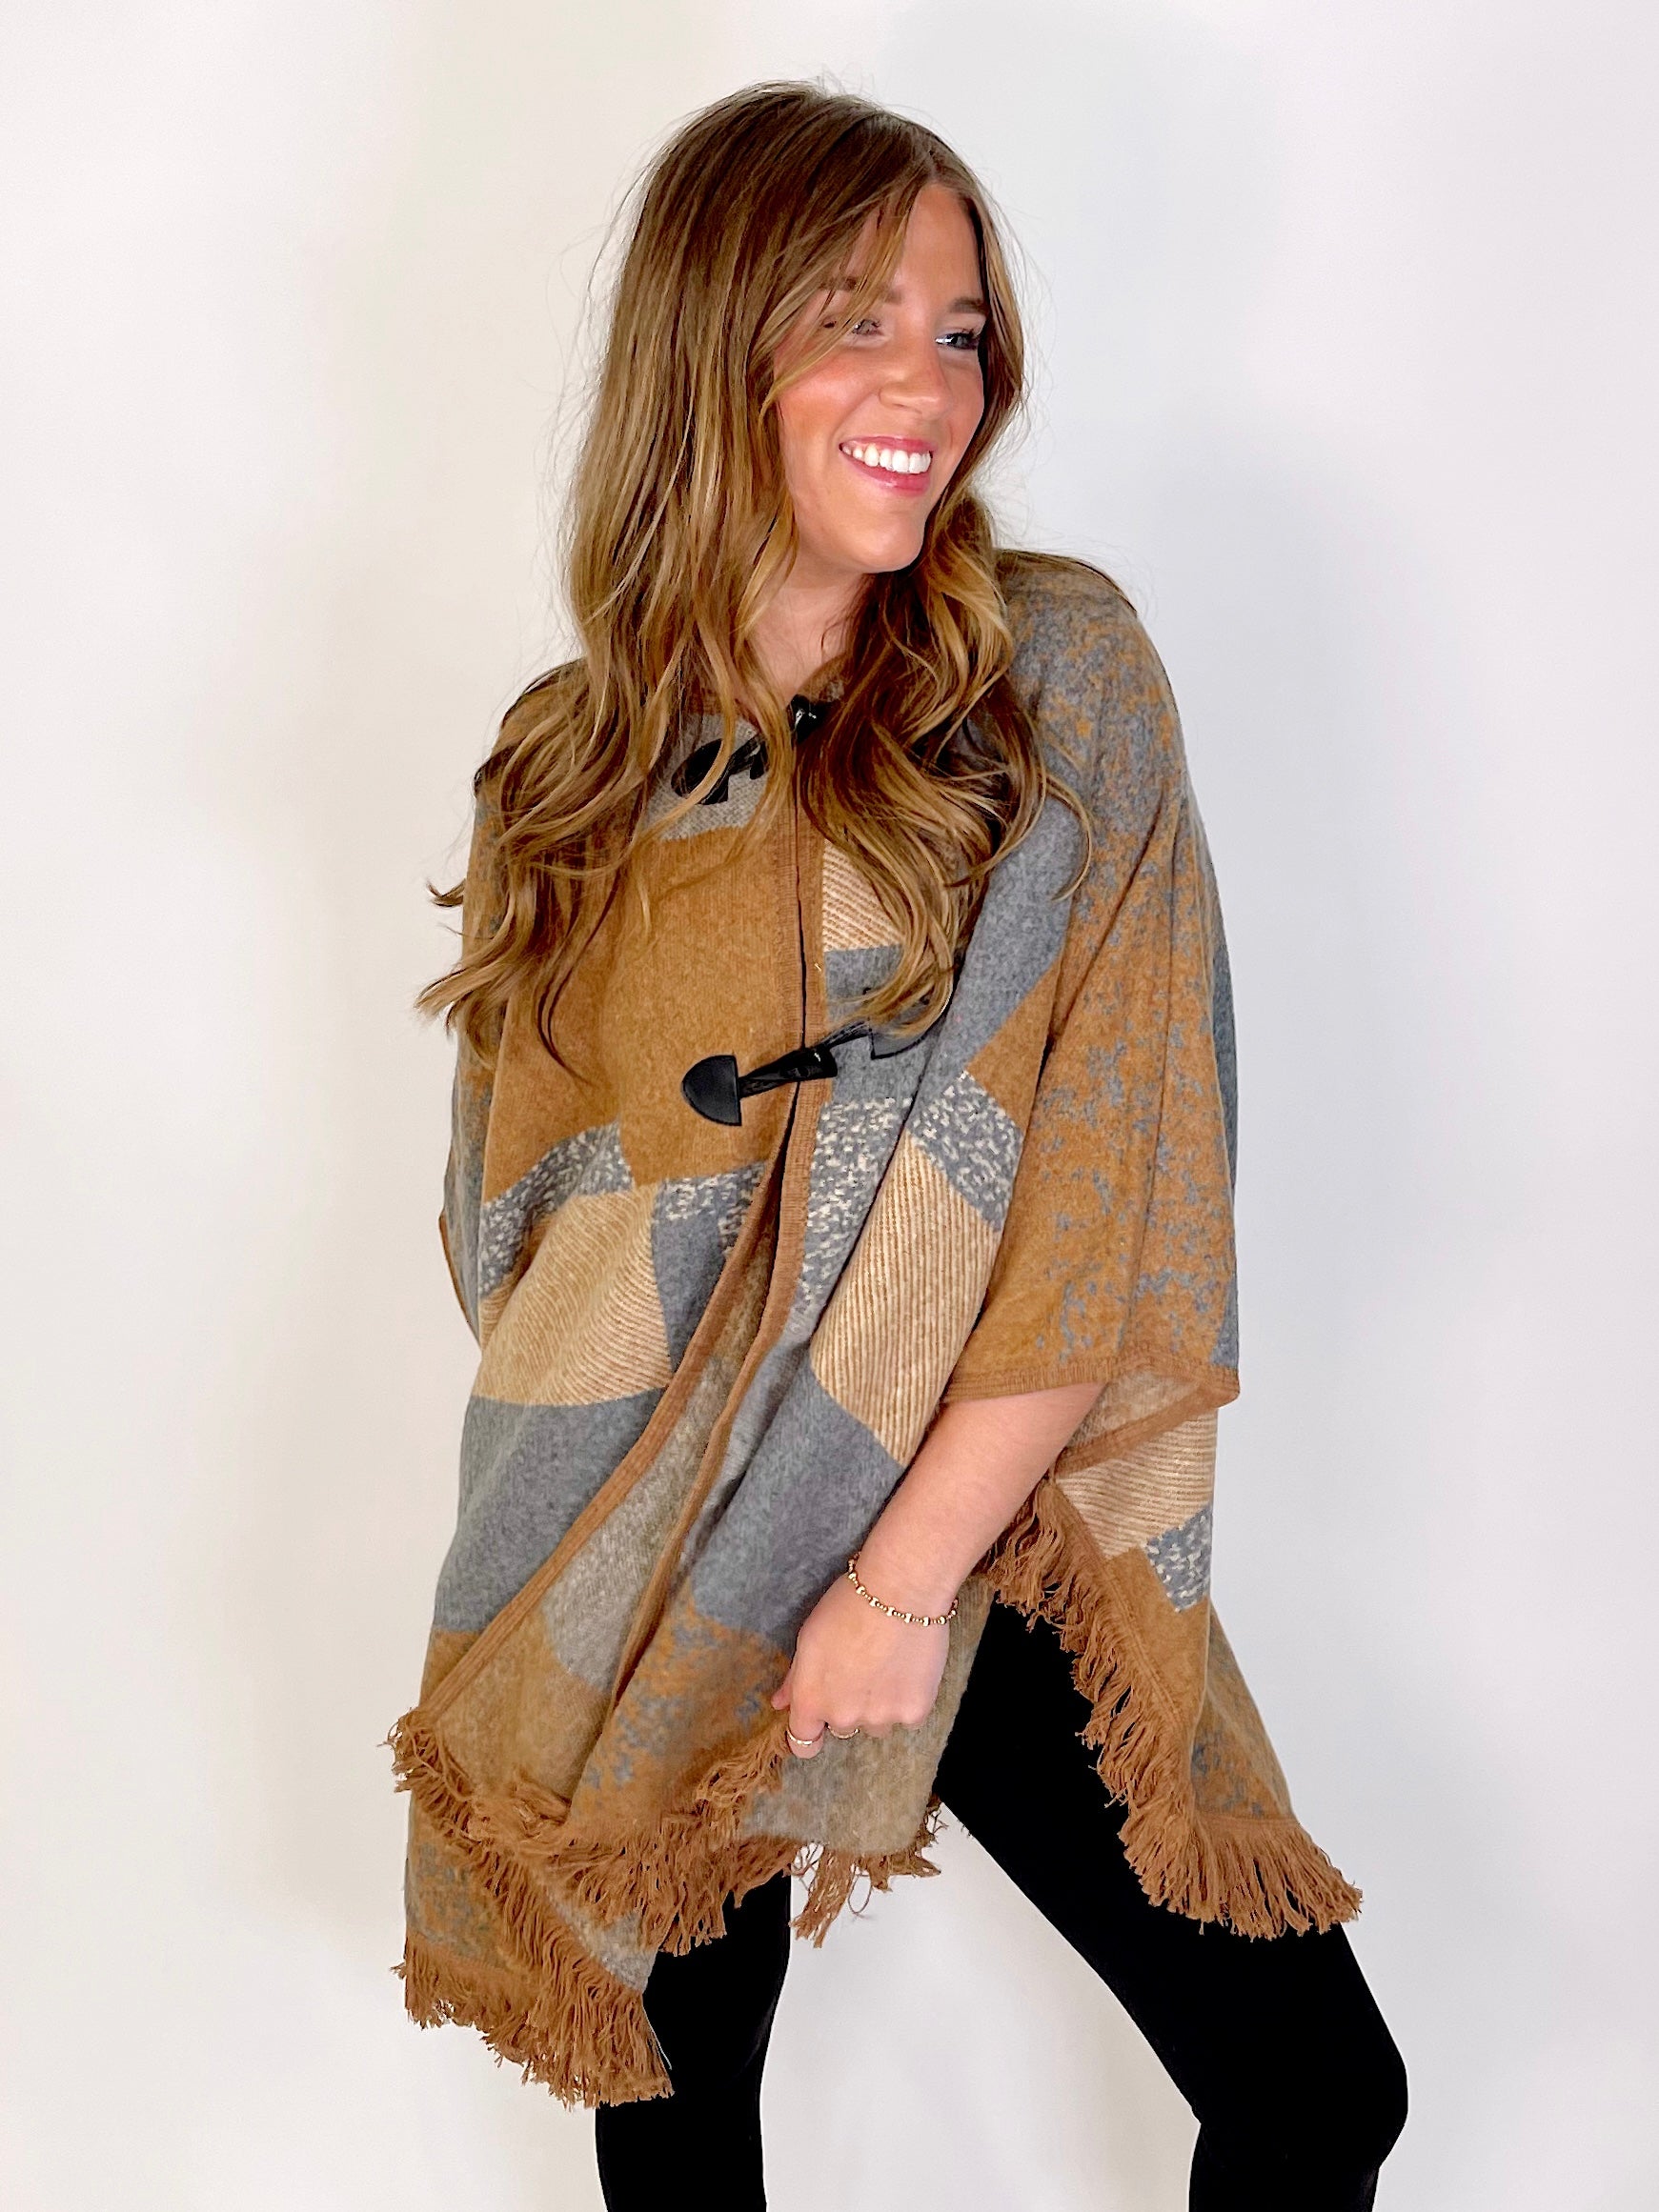 The Ramona Poncho-Poncho-Coco + Carmen-The Village Shoppe, Women’s Fashion Boutique, Shop Online and In Store - Located in Muscle Shoals, AL.